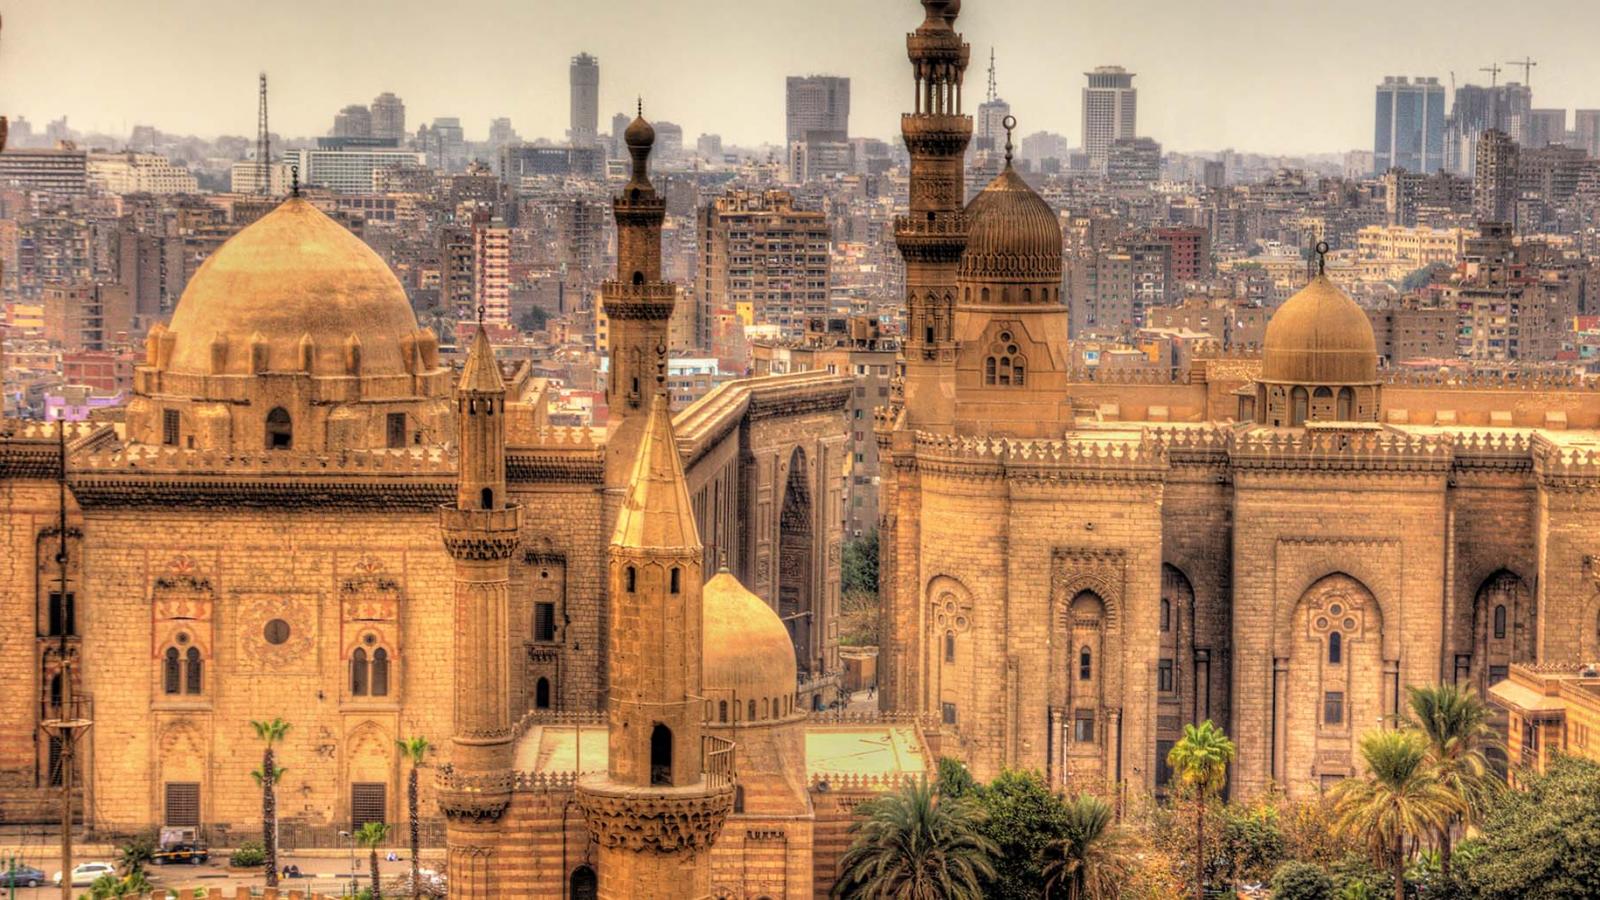 48 hours in Cairo